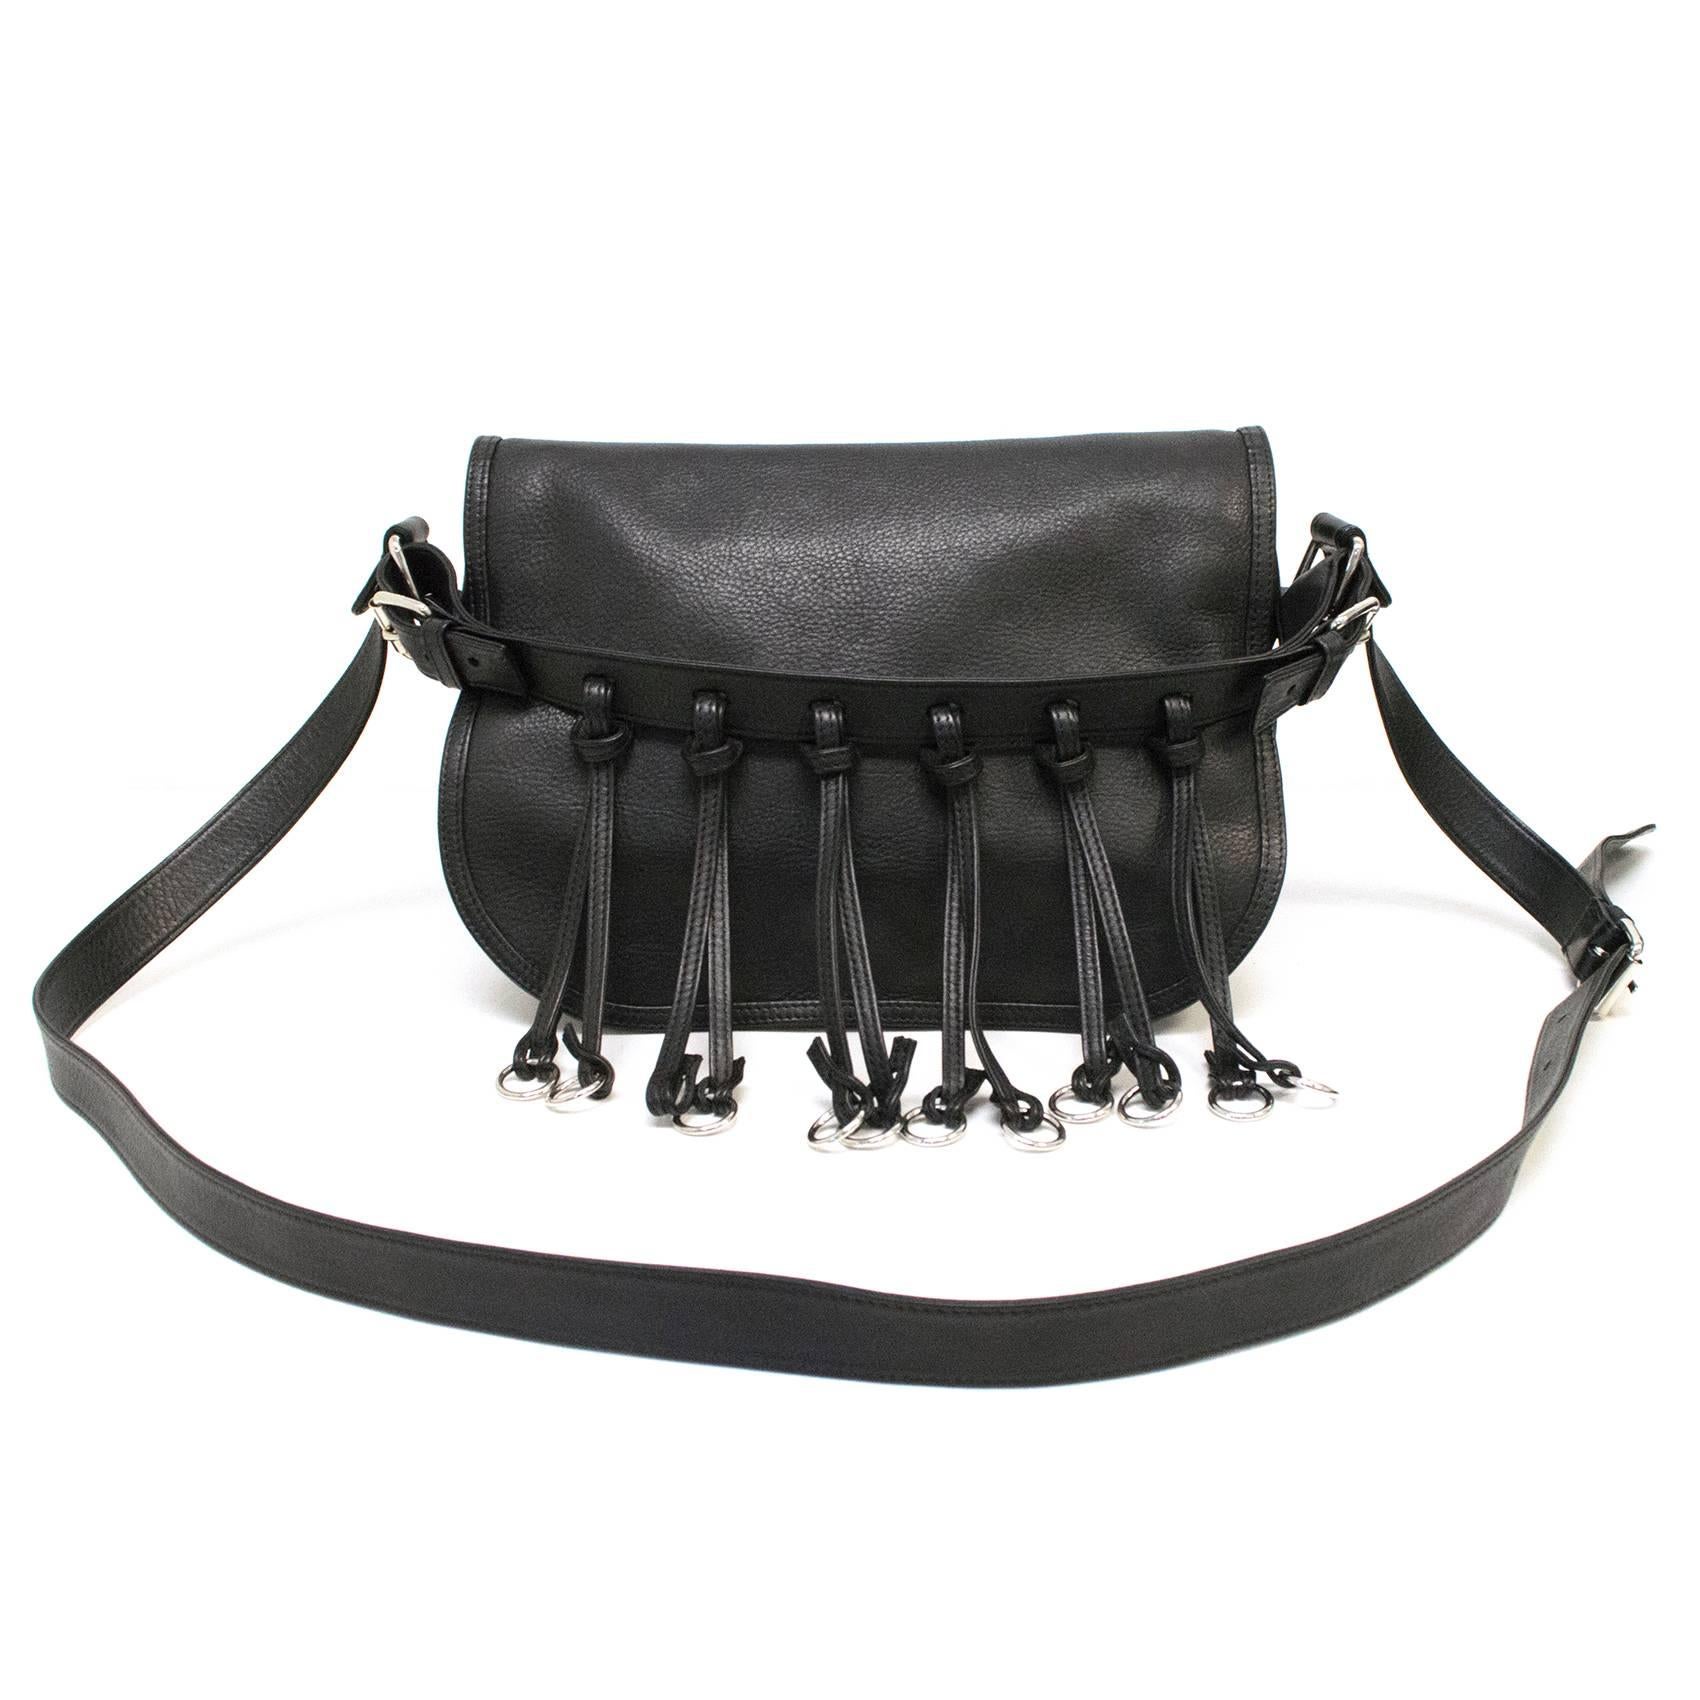 Balmain black leather saddle bag with shoulder strap and fringe. Features an inner compartment and adjustable straps. Fringe has silver rings to match silver hardware. Please kindly note fringe is missing one ring, (please refer to images 2 for